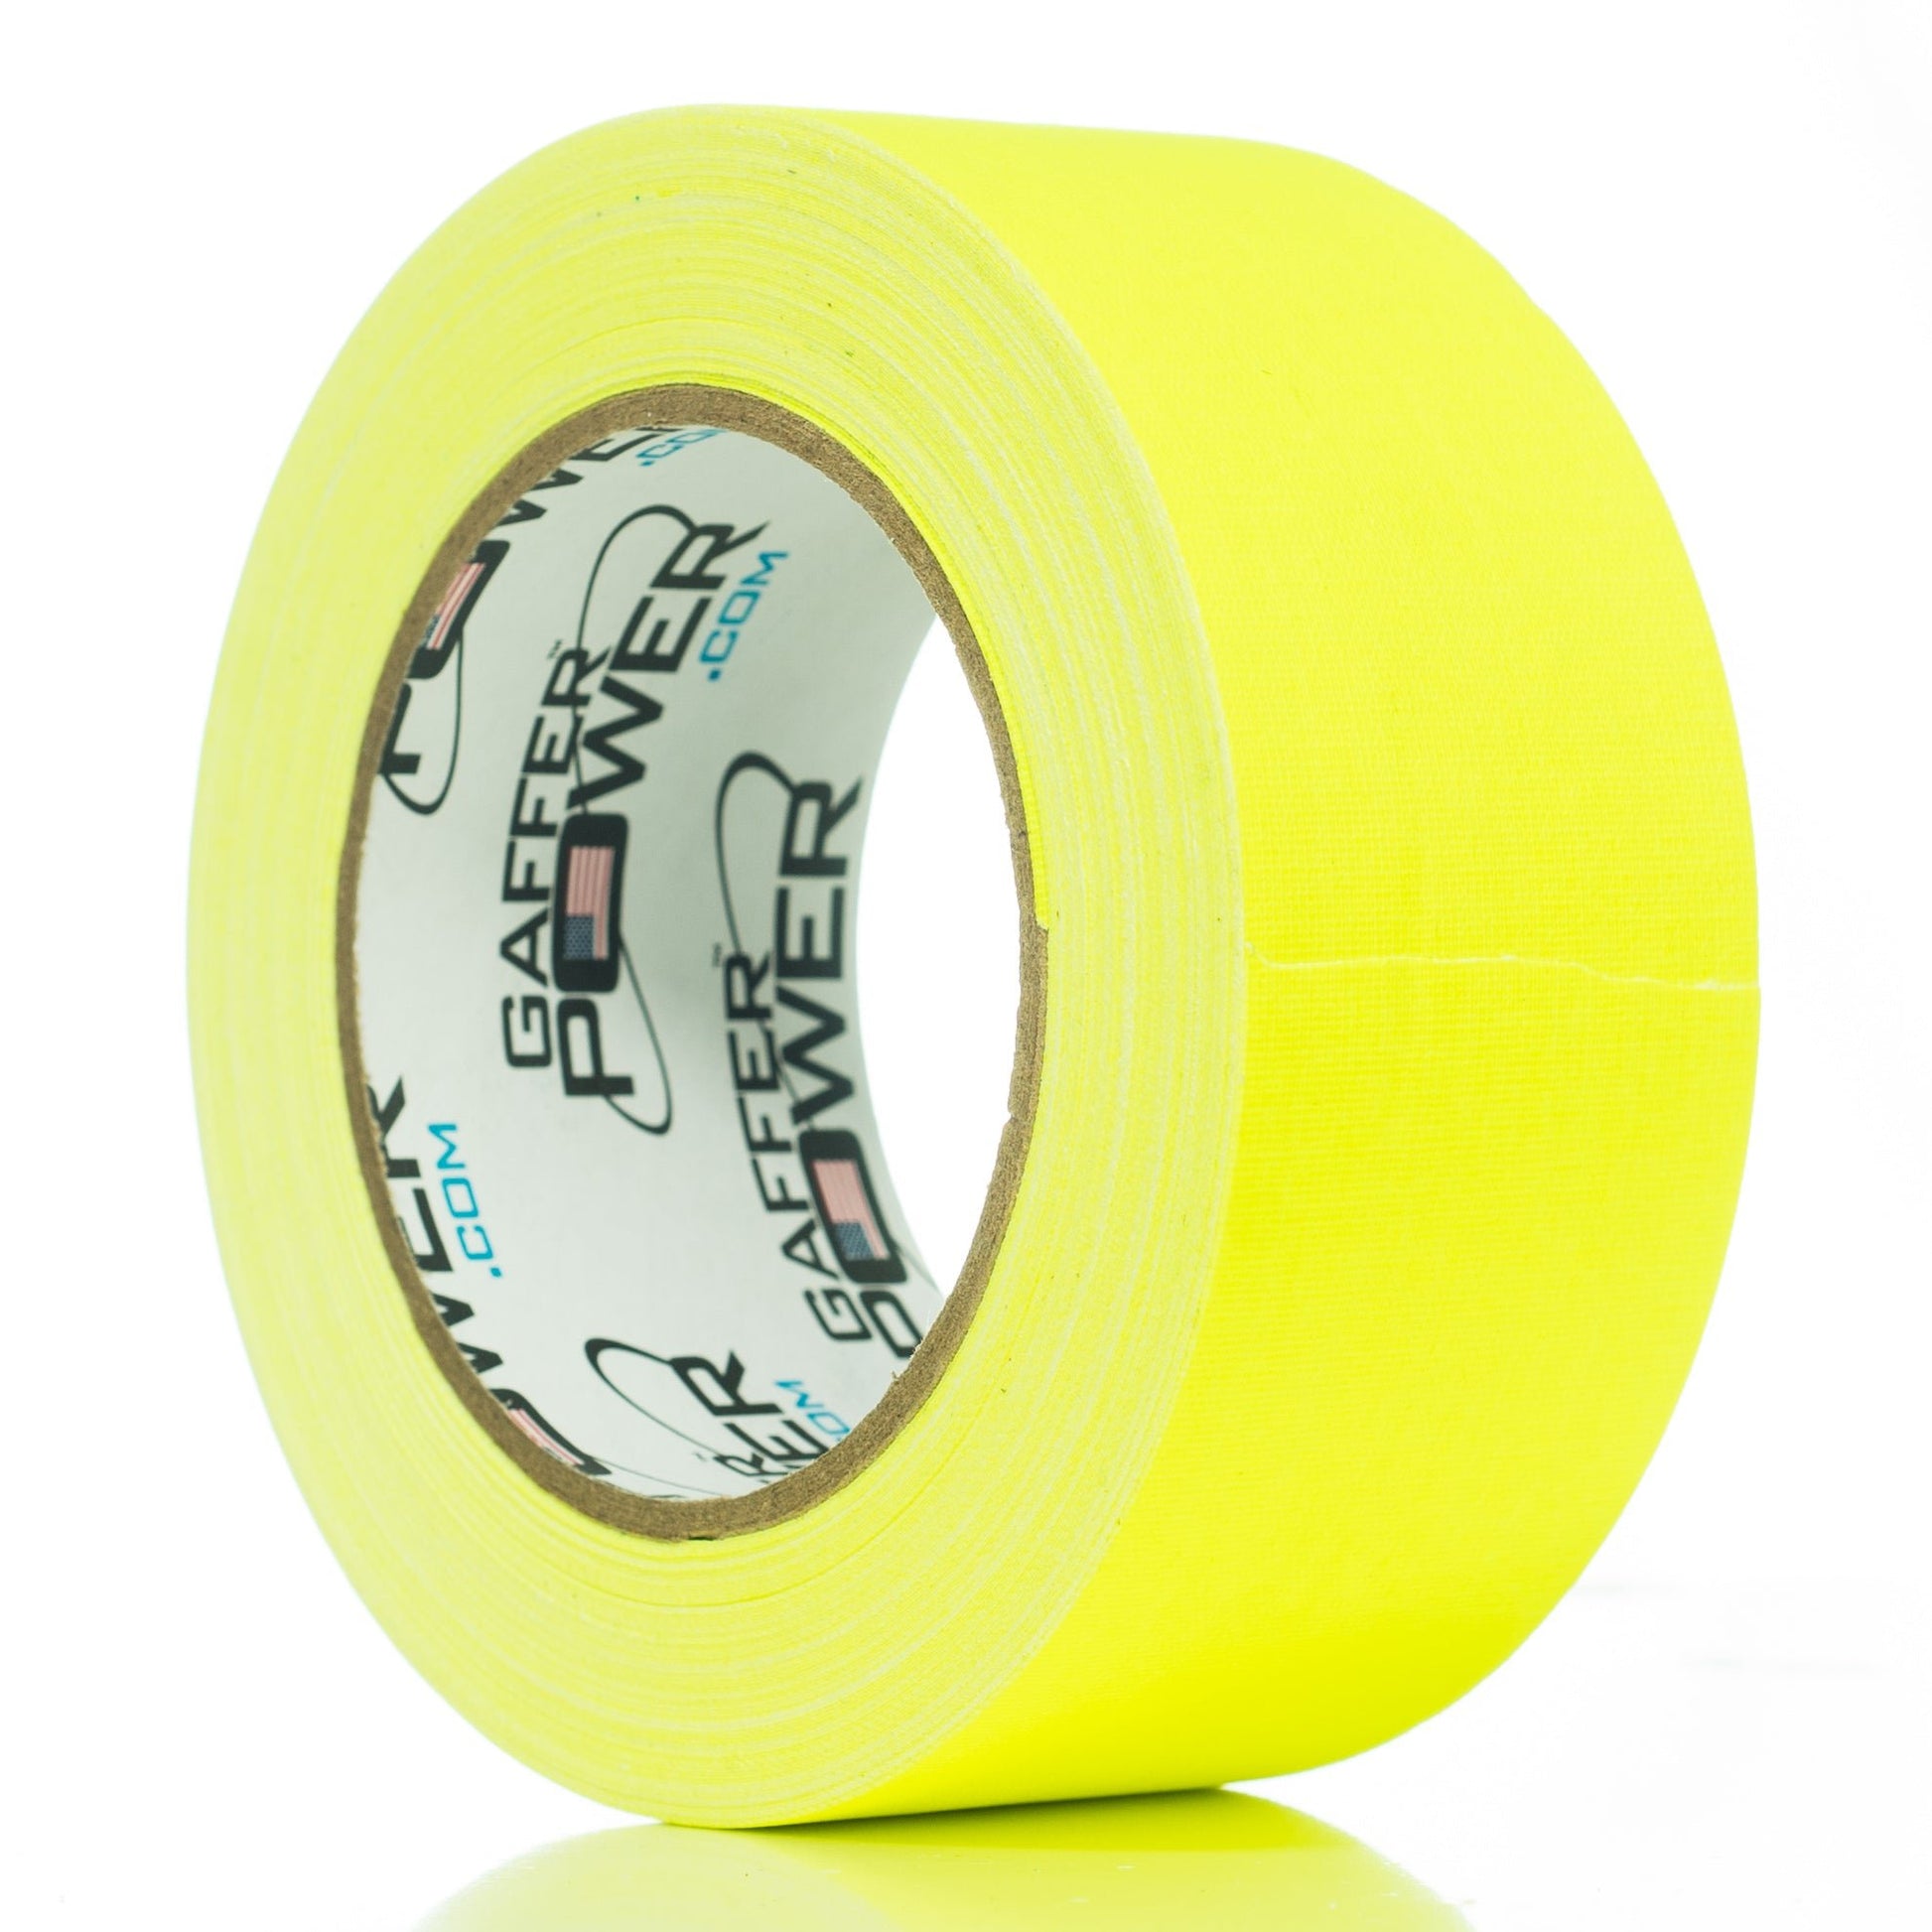 Gaffer Power Real Professional Grade Gaffer Tape, Made in The USA, Yellow Fluorescent 2 Inches by 30 Yards, UV Blacklight Reactive Fluorescent Heavy